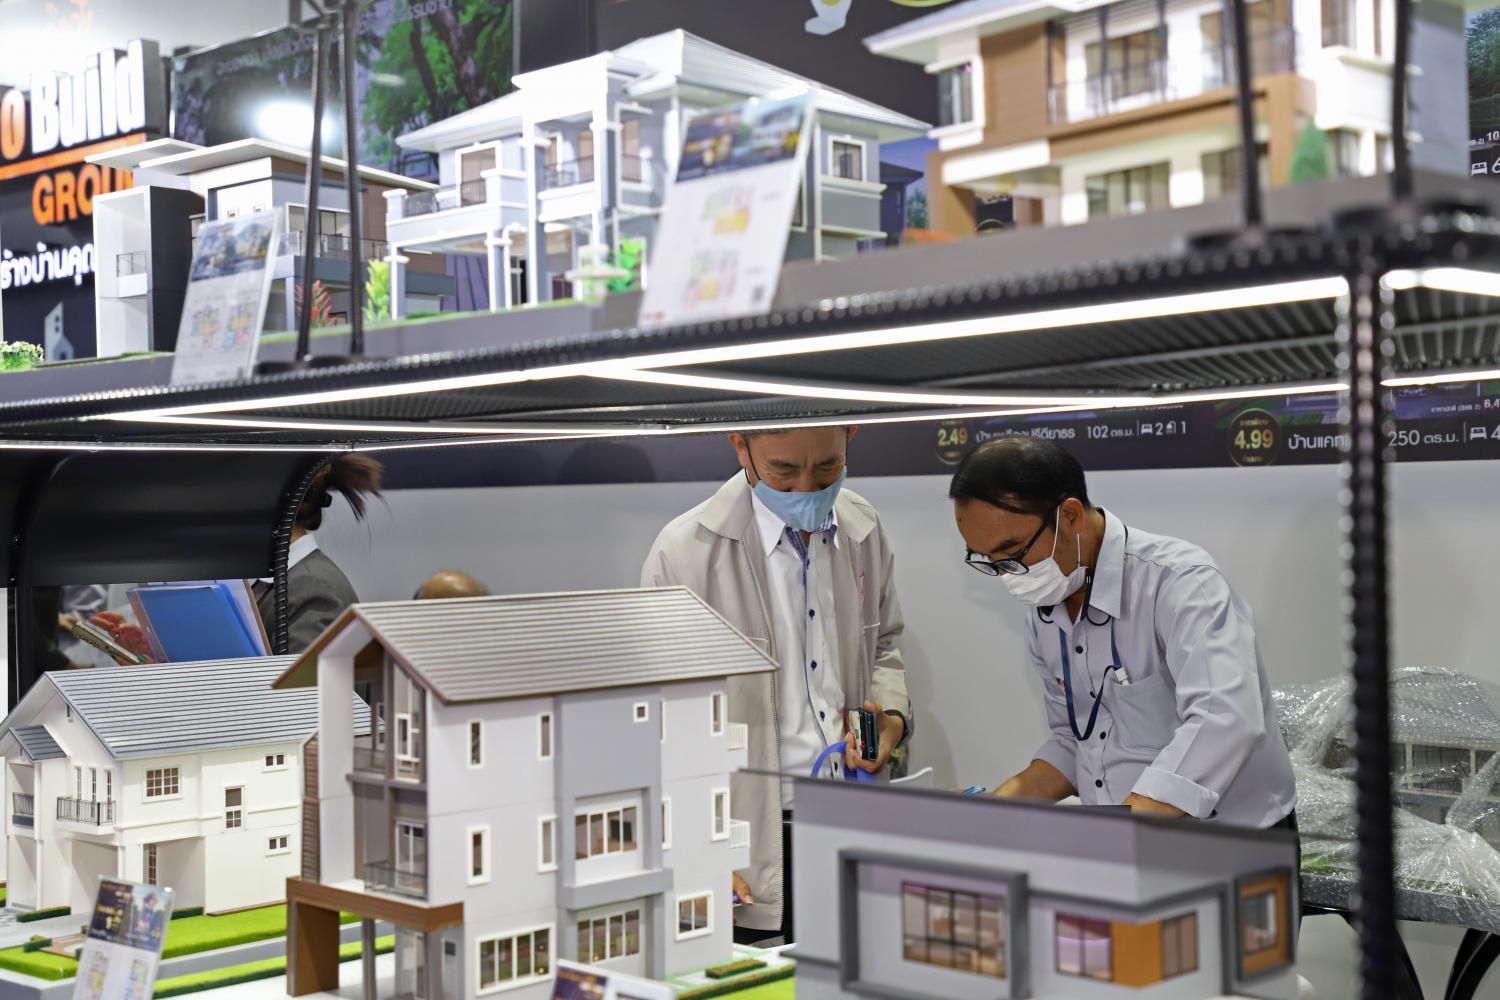 Miniature models of houses on display at a recent property fair. Mr Vichai said developers saw decreases in housing sales and transfers for several quarters due to lower purchasing power and weak demand. (Photo: Varuth Hirunyatheb)